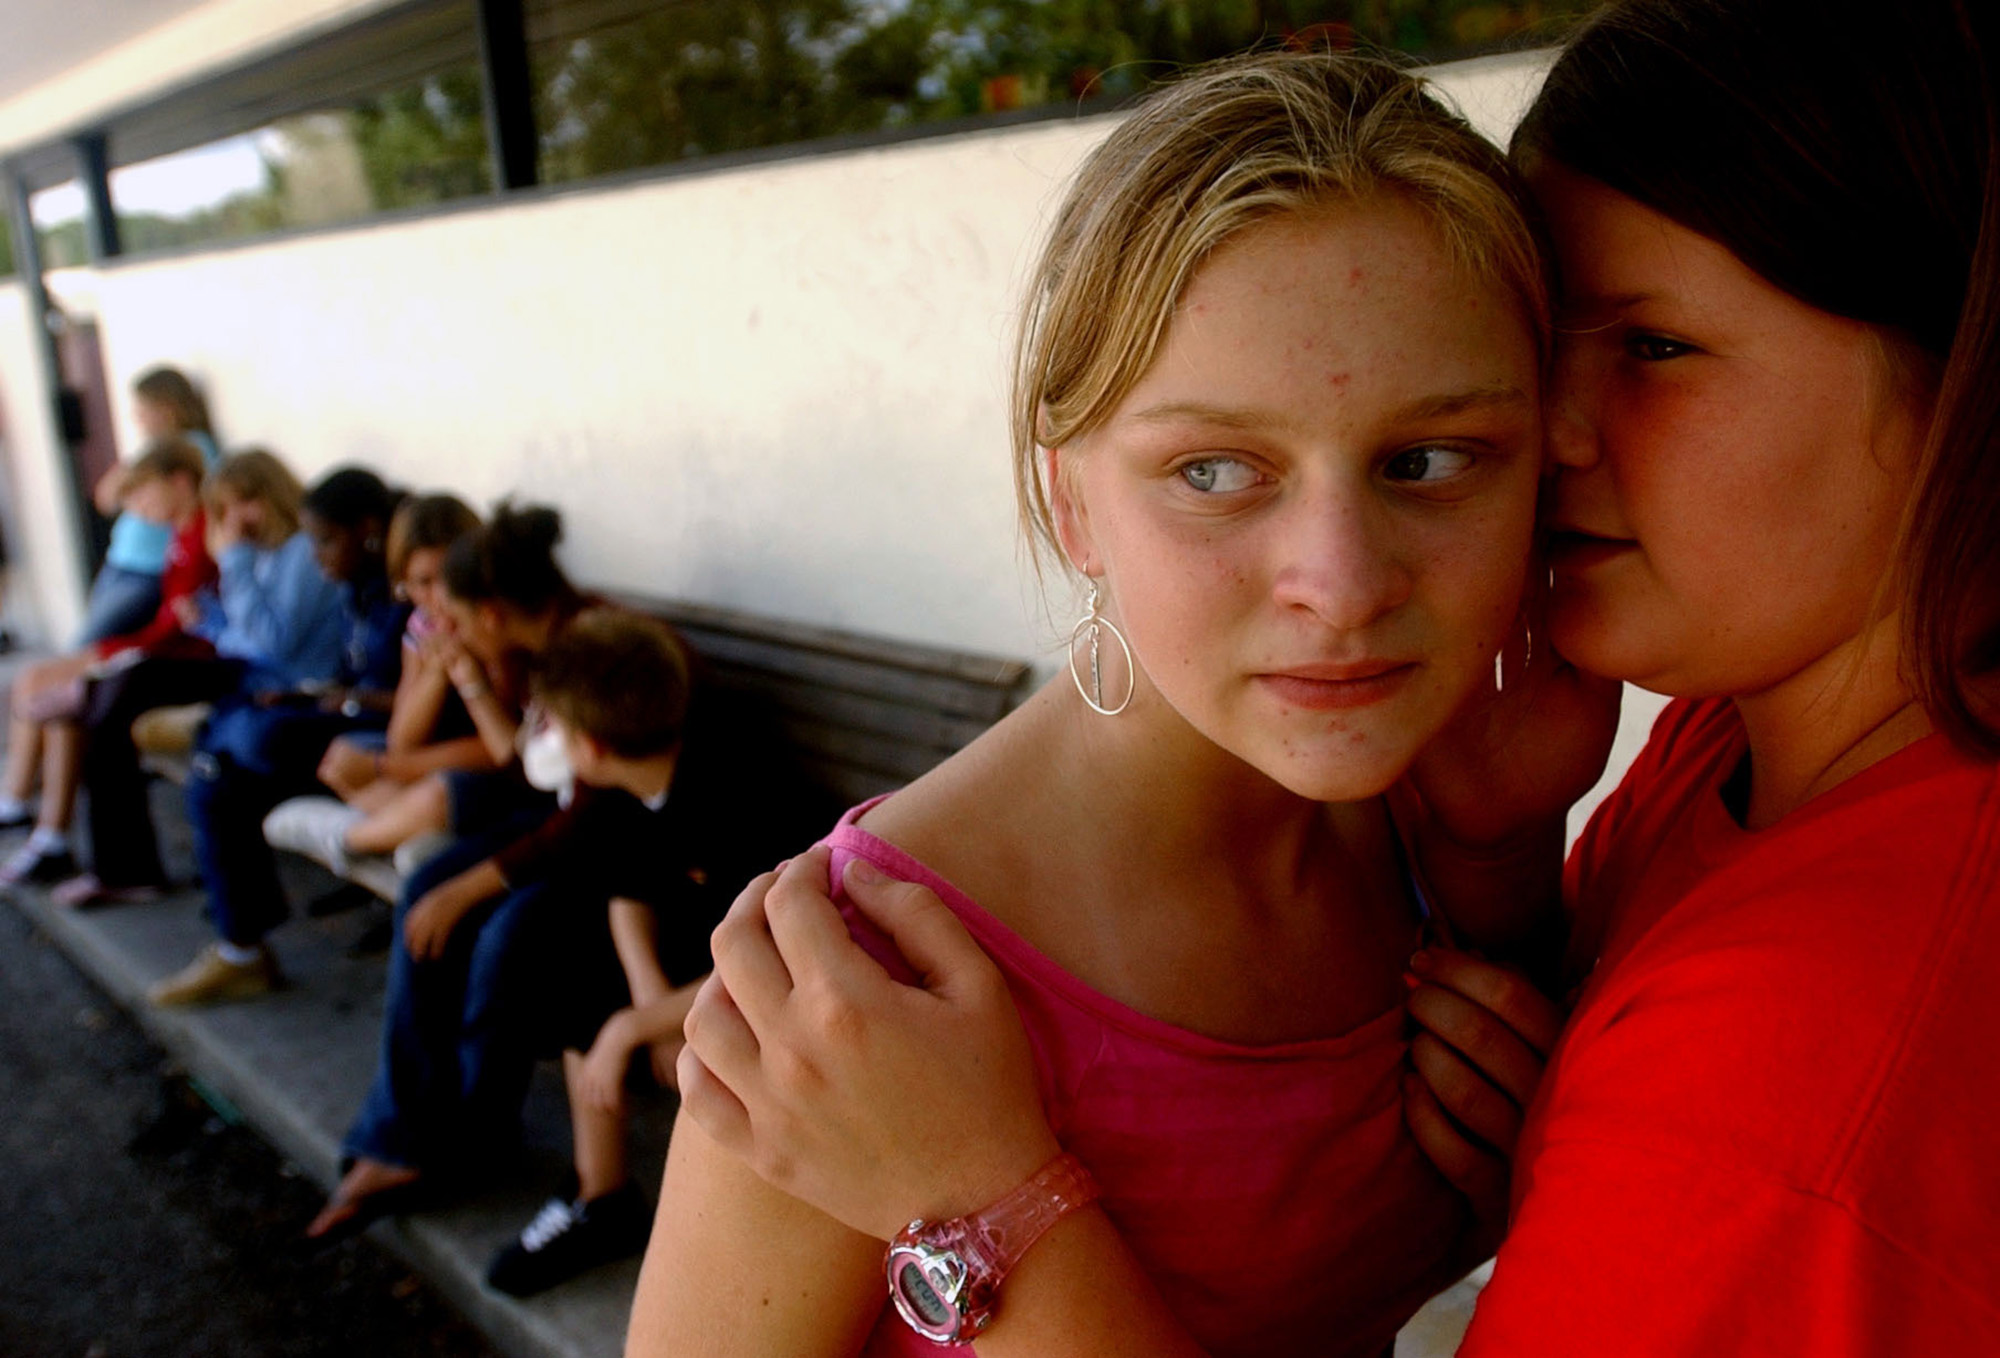  Sloane Moss, 11, right, whispers a secret to Diana Stoneking, 12, about the boy Stoneking likes while the two hang out at the Vero Beach Boys and Girls Club on Tuesday. Moss says that her and Stoneking, who both part of the Junior Staff of the club,